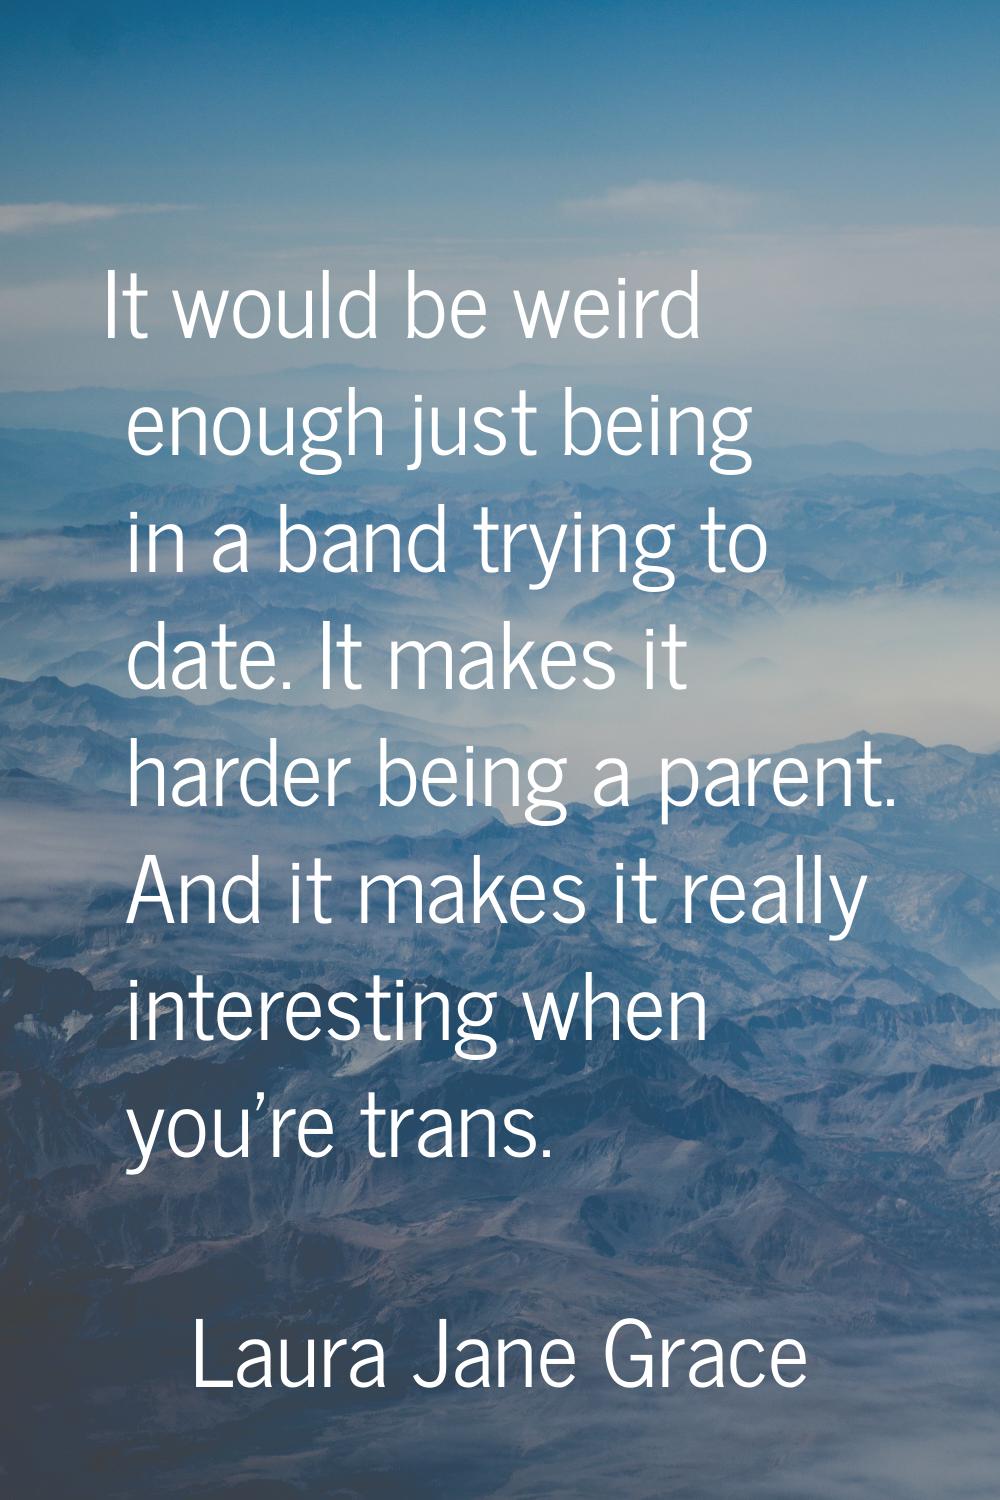 It would be weird enough just being in a band trying to date. It makes it harder being a parent. An